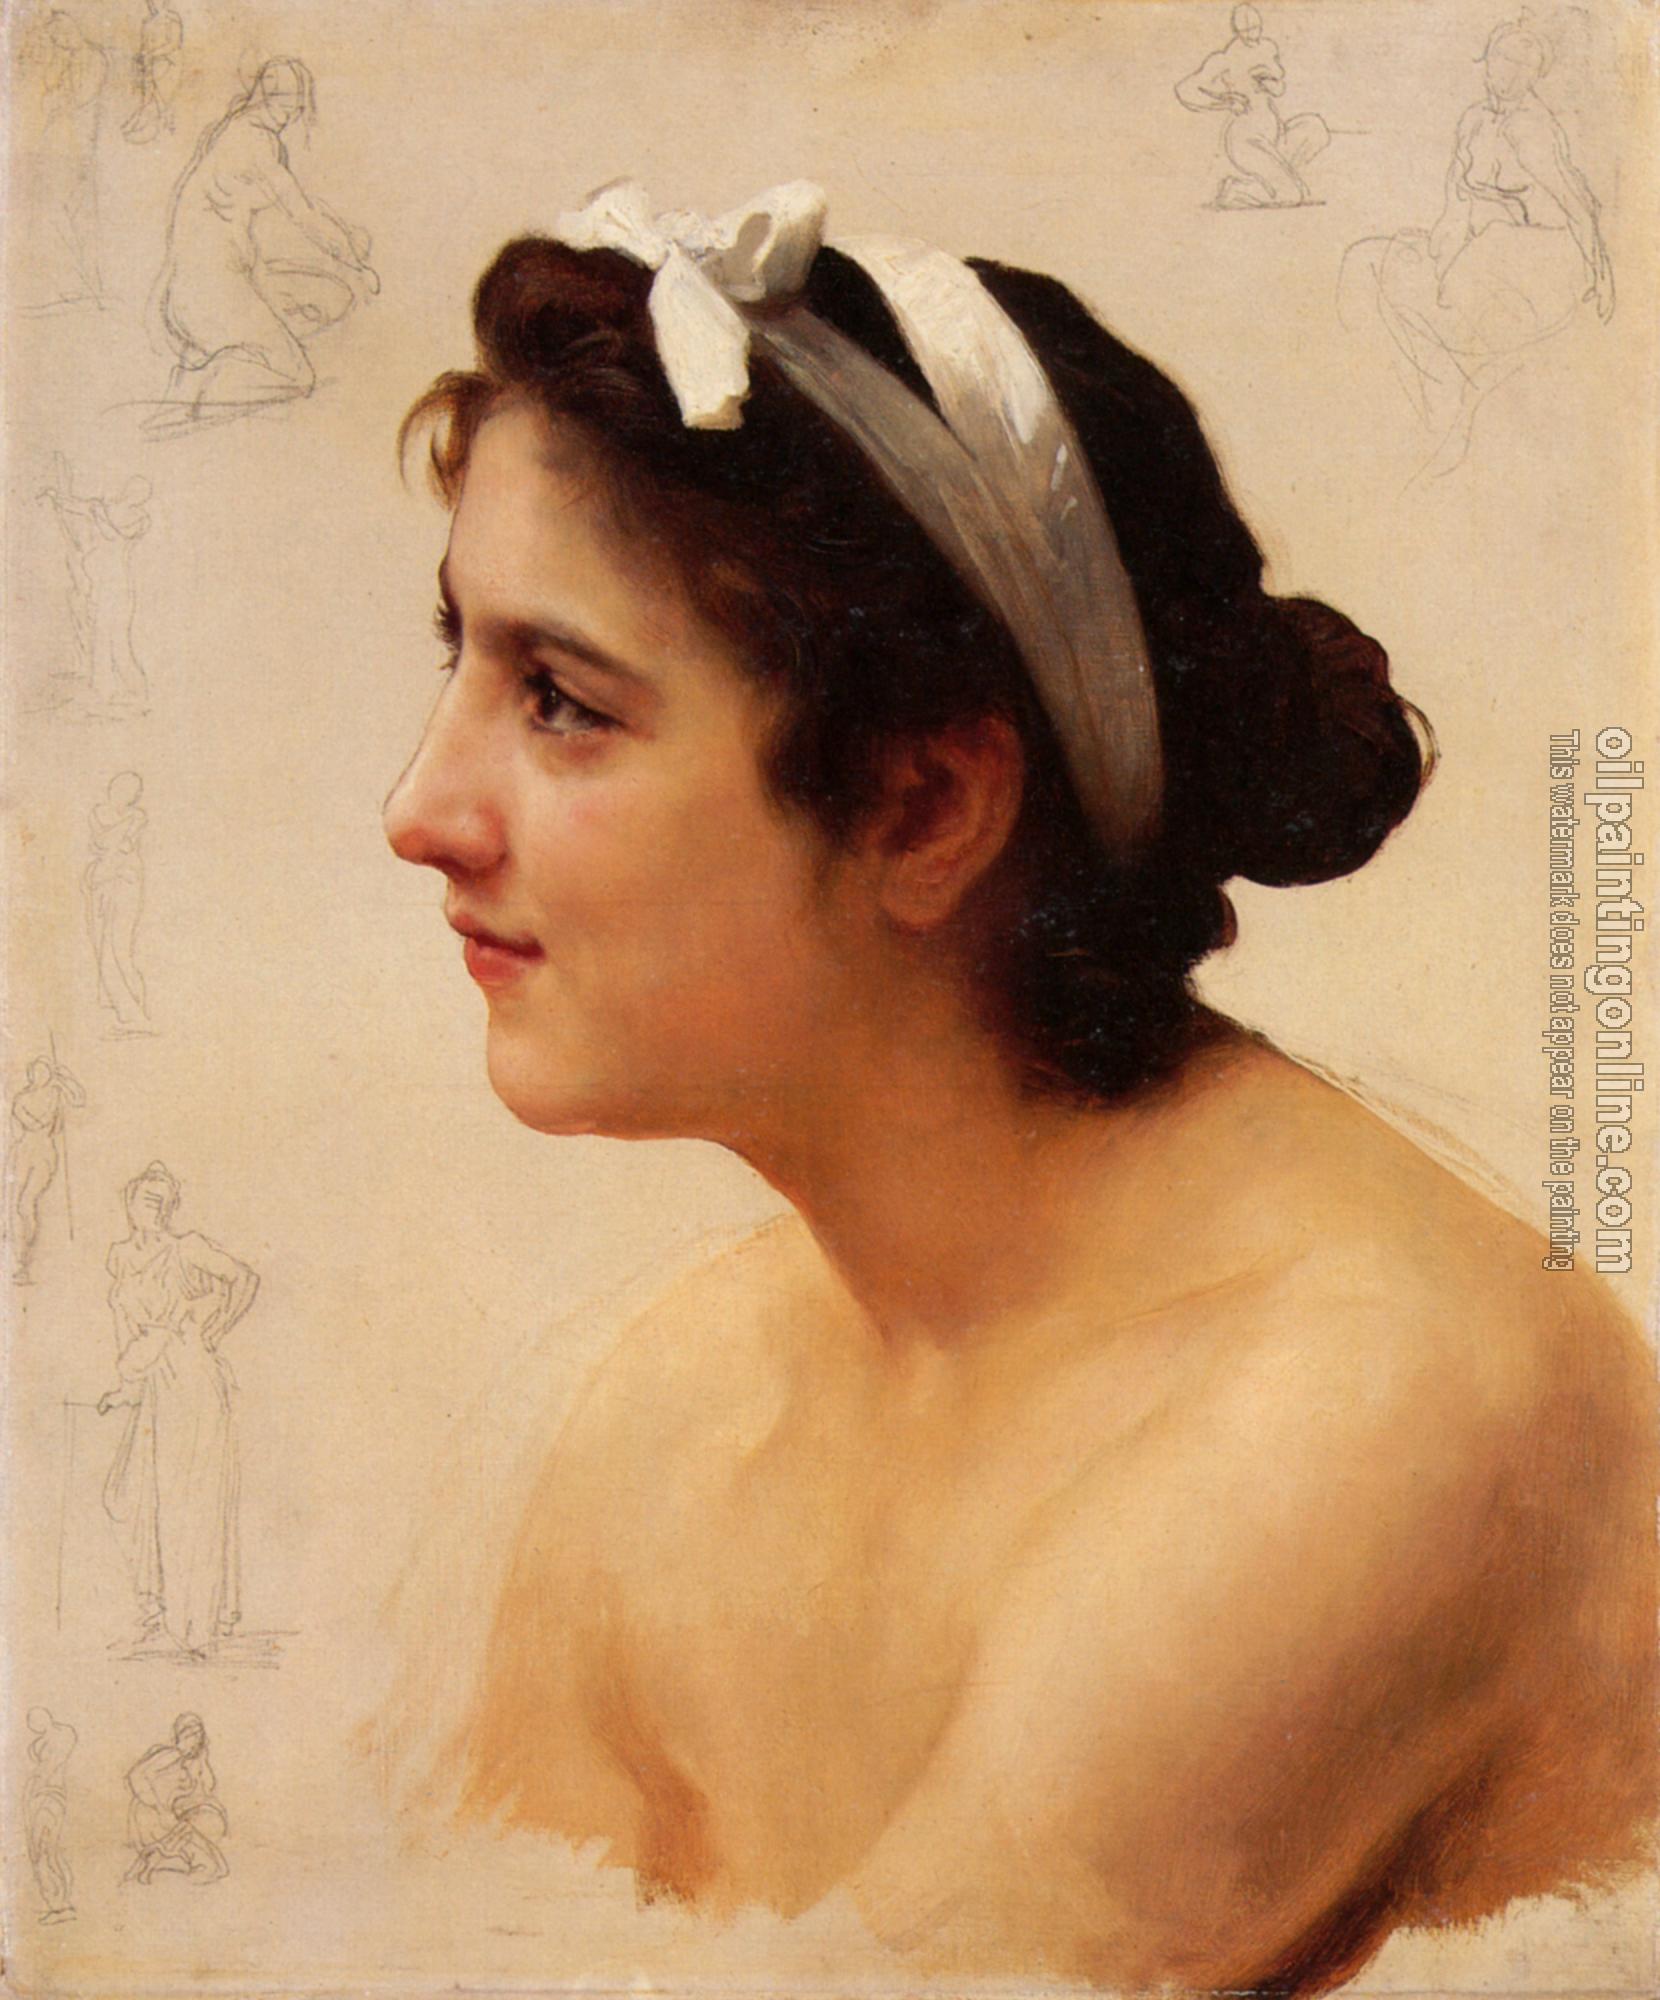 Bouguereau, William-Adolphe - Etude d'une femme, pour Offrande a l'Amour( Study of a woman, for Offering to Love)